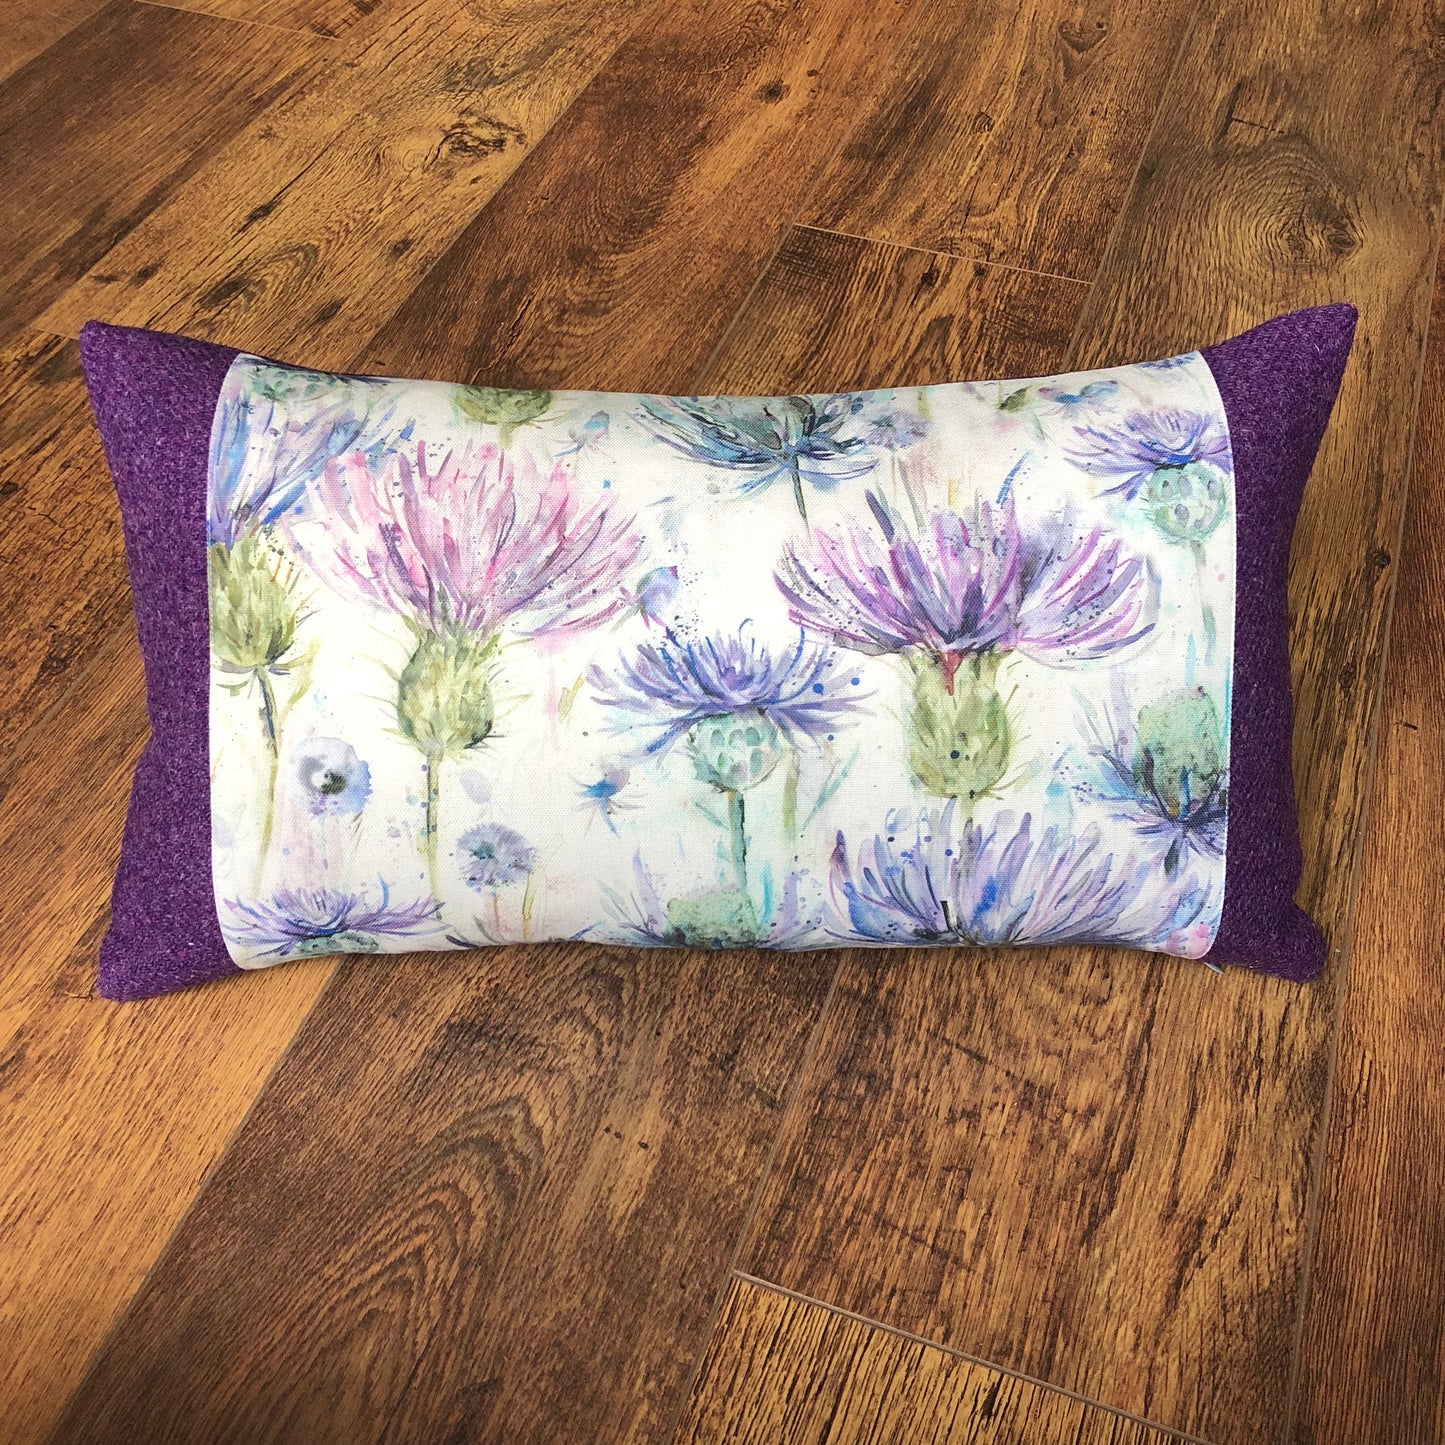 Scottish Watercolour Thistle with Purple Harris Tweed Oblong Cushion